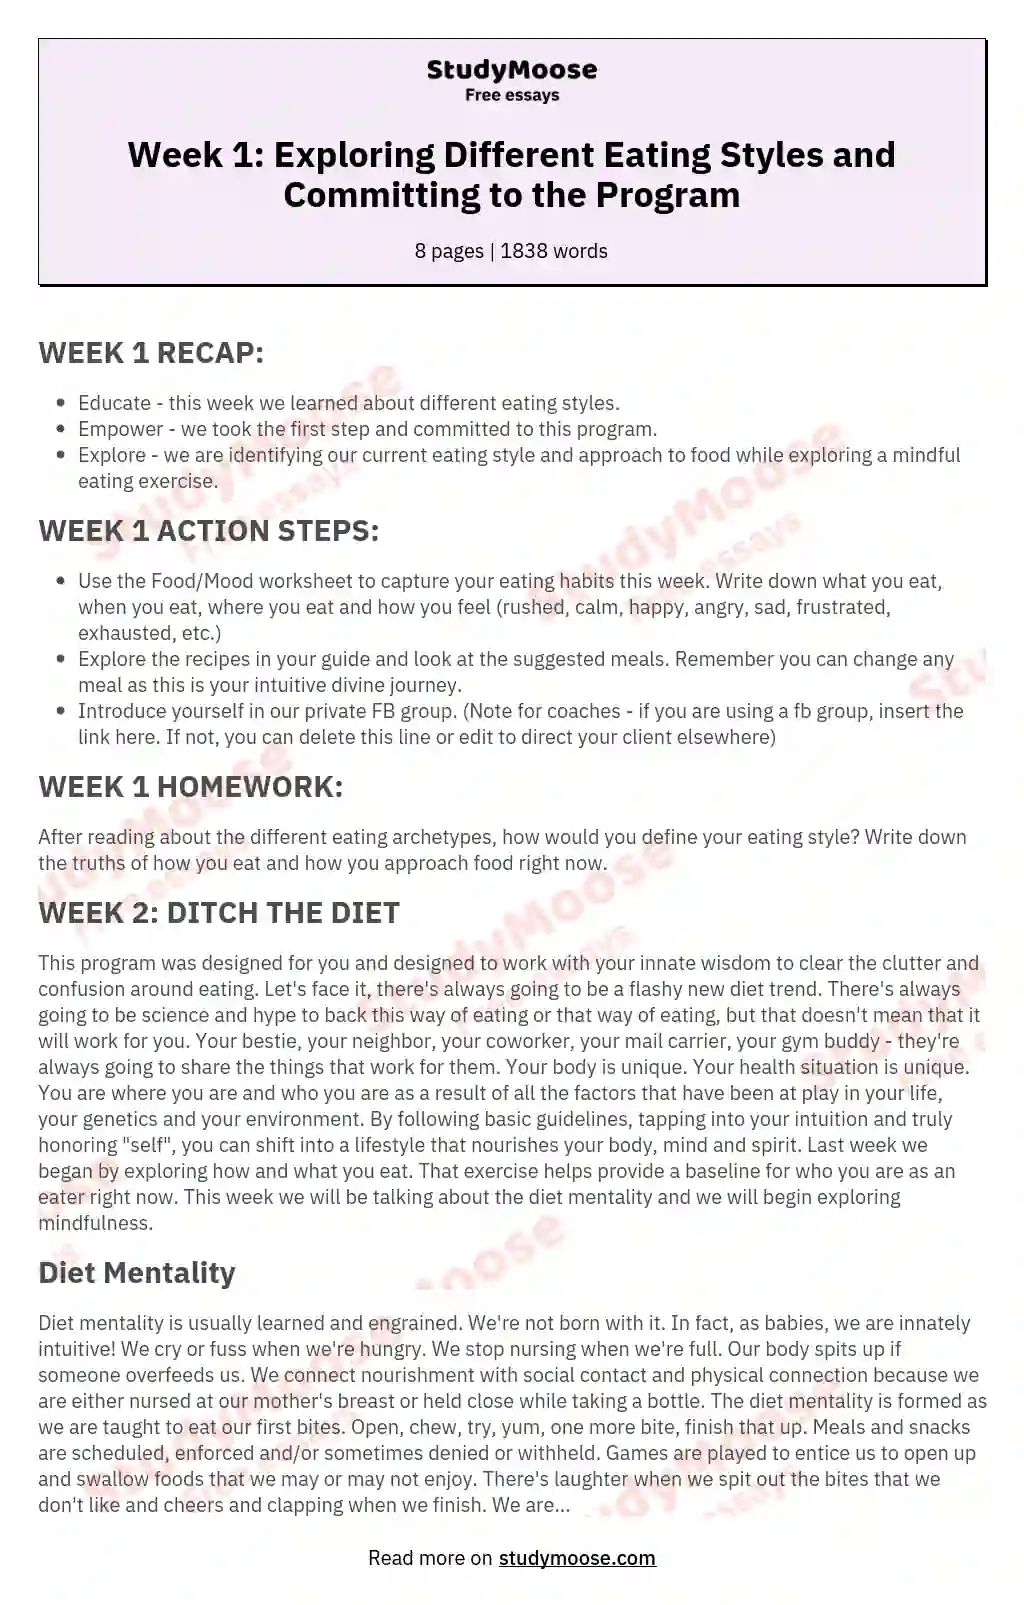 Week 1: Exploring Different Eating Styles and Committing to the Program essay